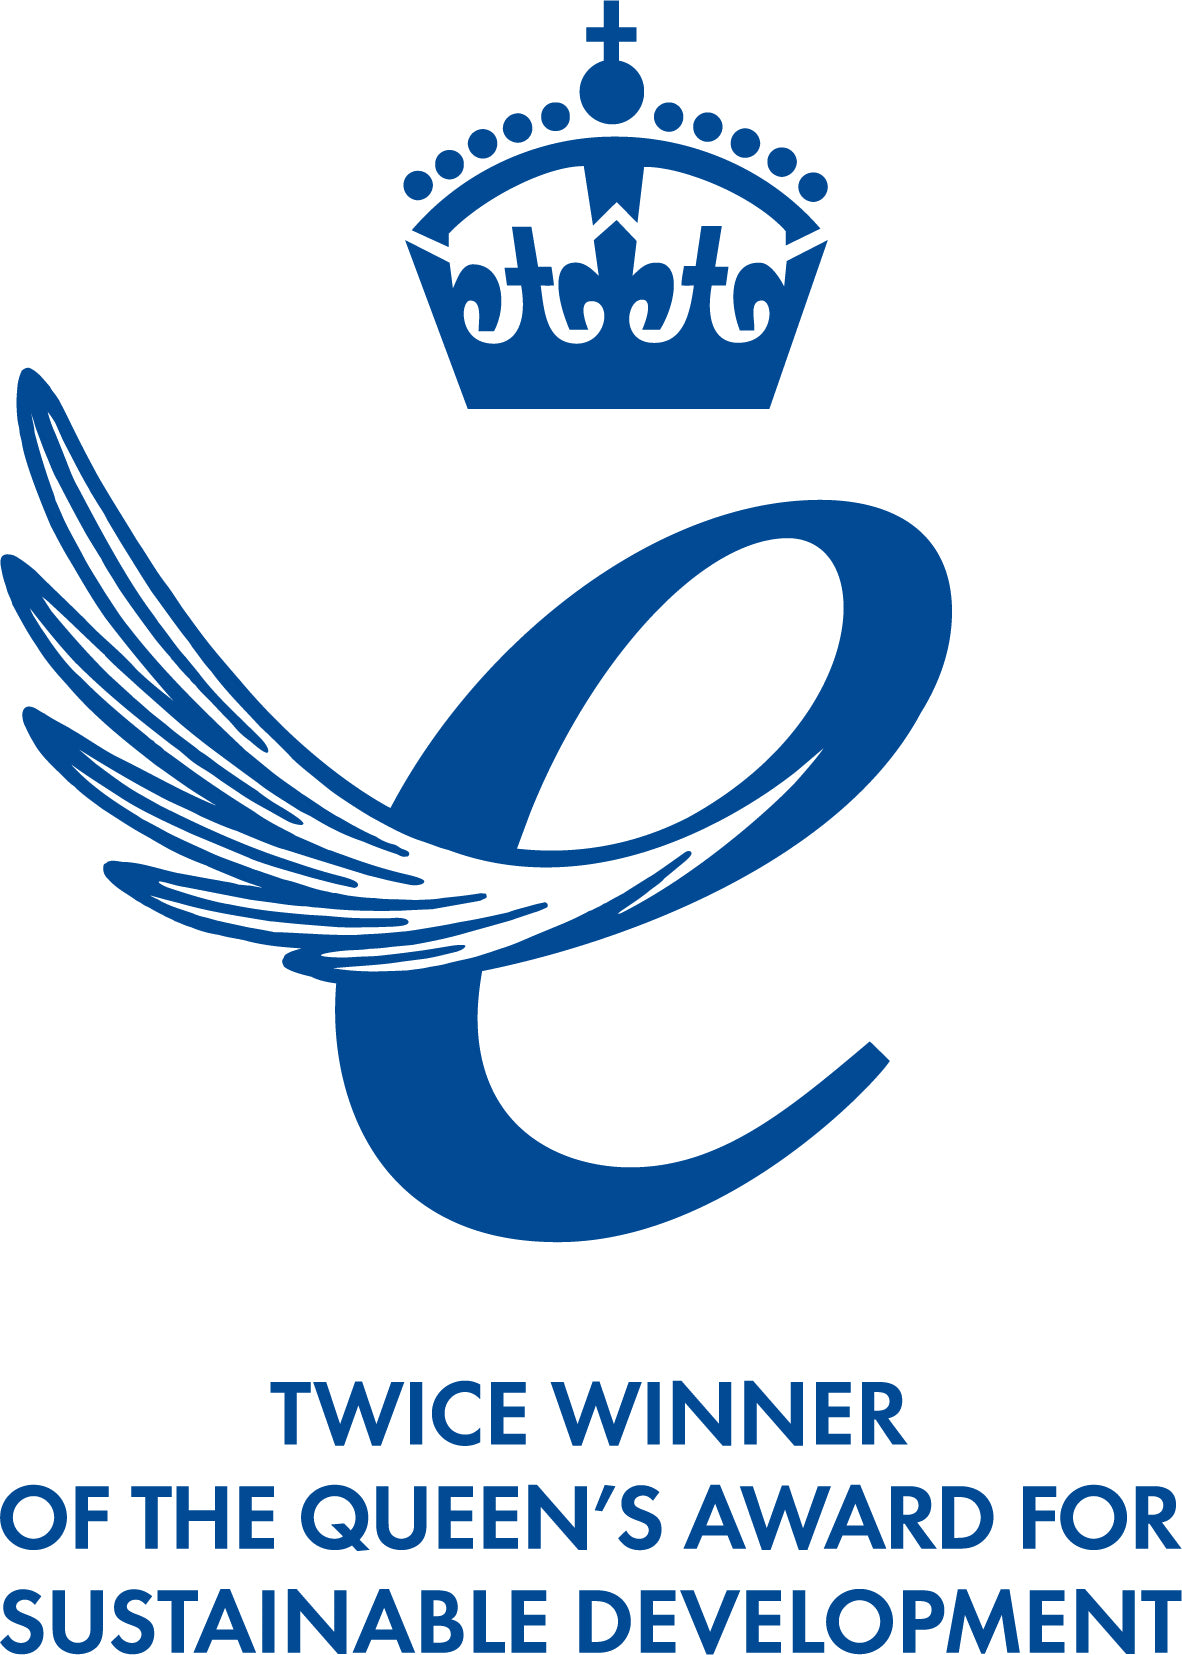 Incognito Twice winner of the Queen's Award for sustainable development